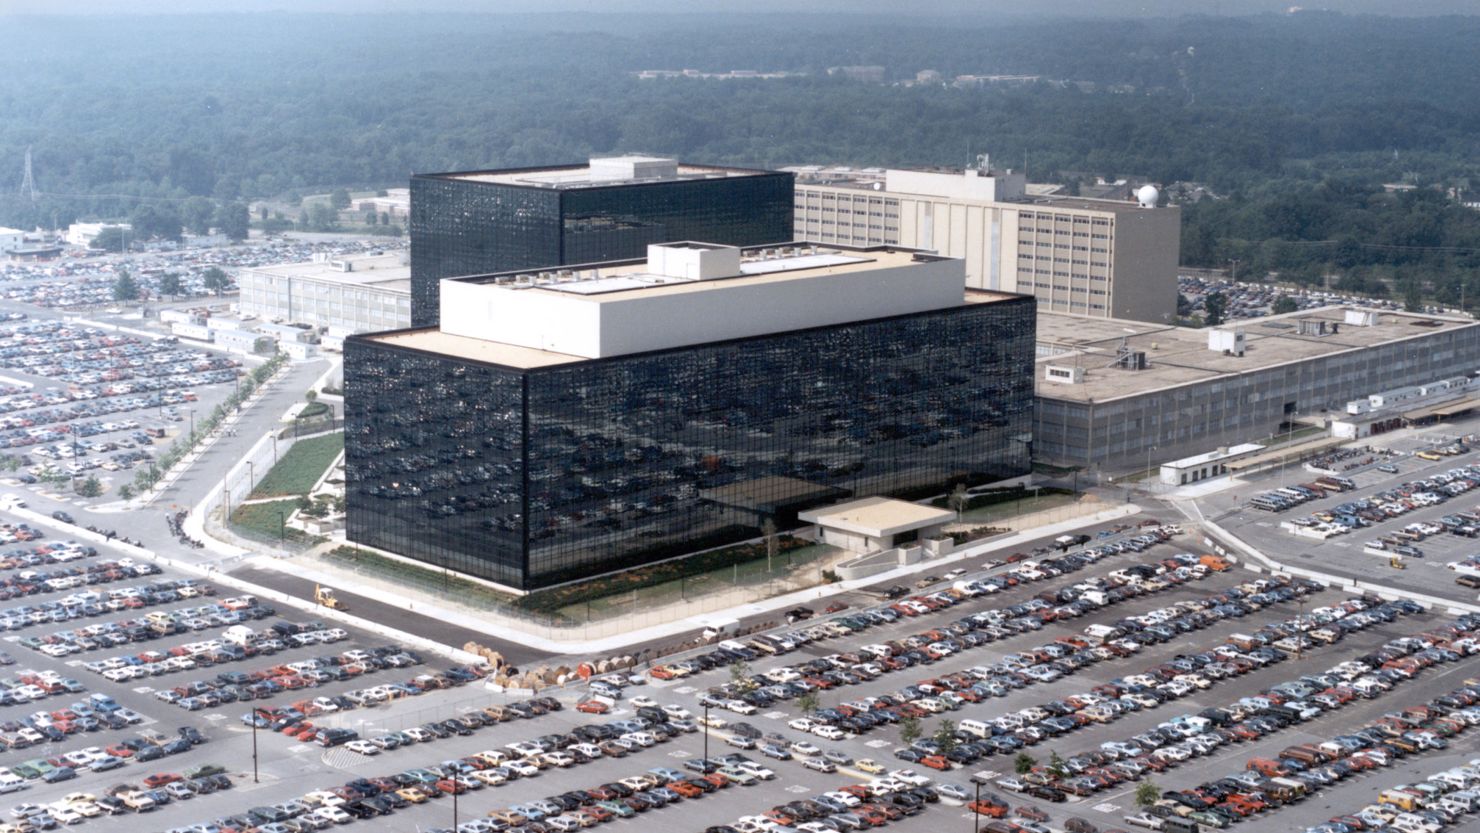 National Security Agency (NSA) headquarters in Fort Meade, Maryland.